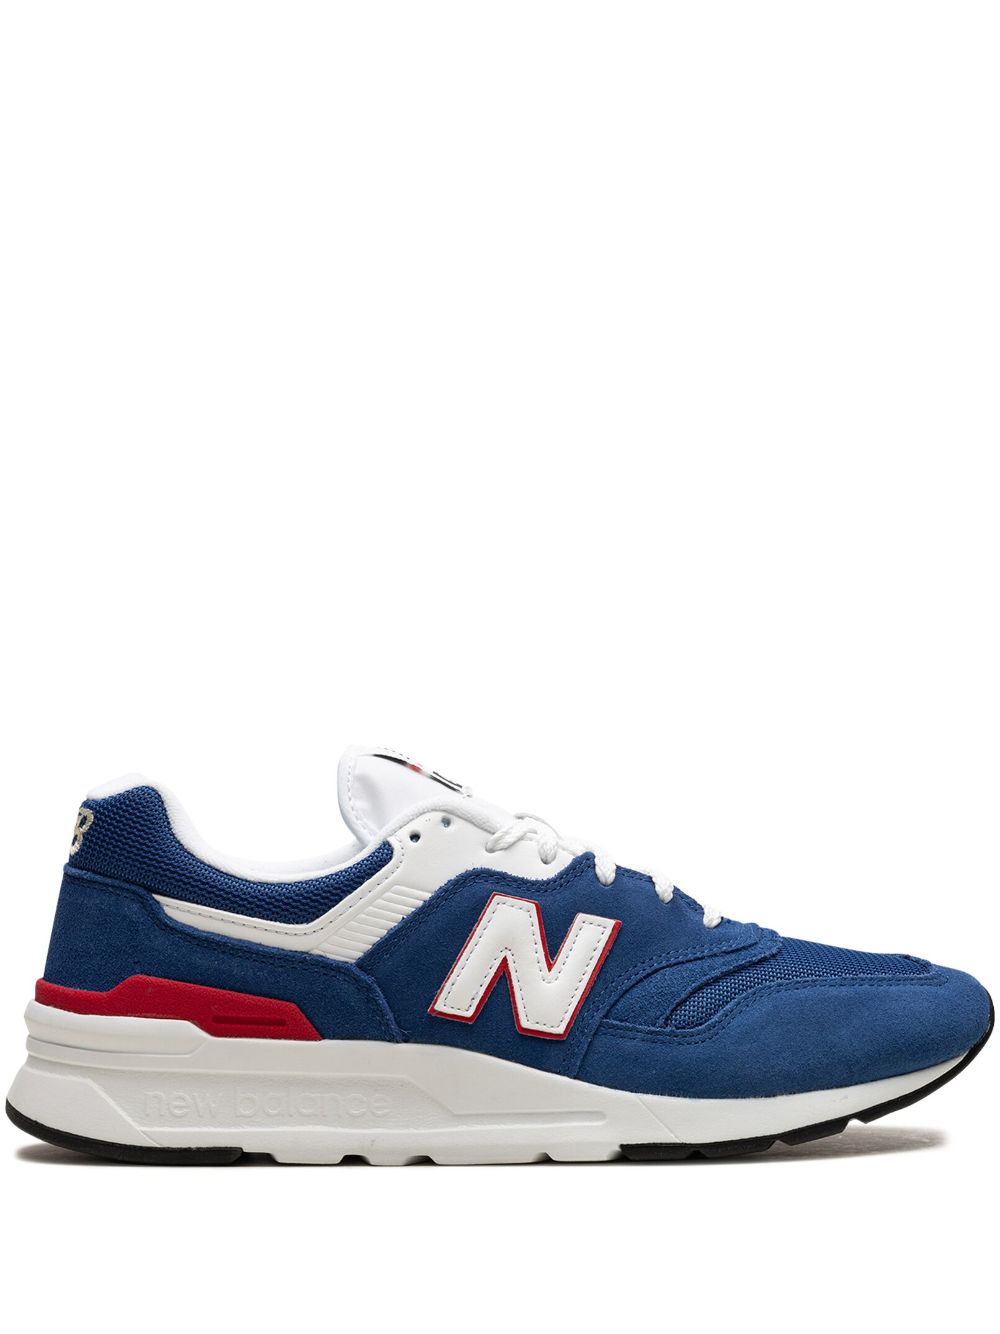 New Balance 997 "Royal" low-top sneakers - Blue von New Balance